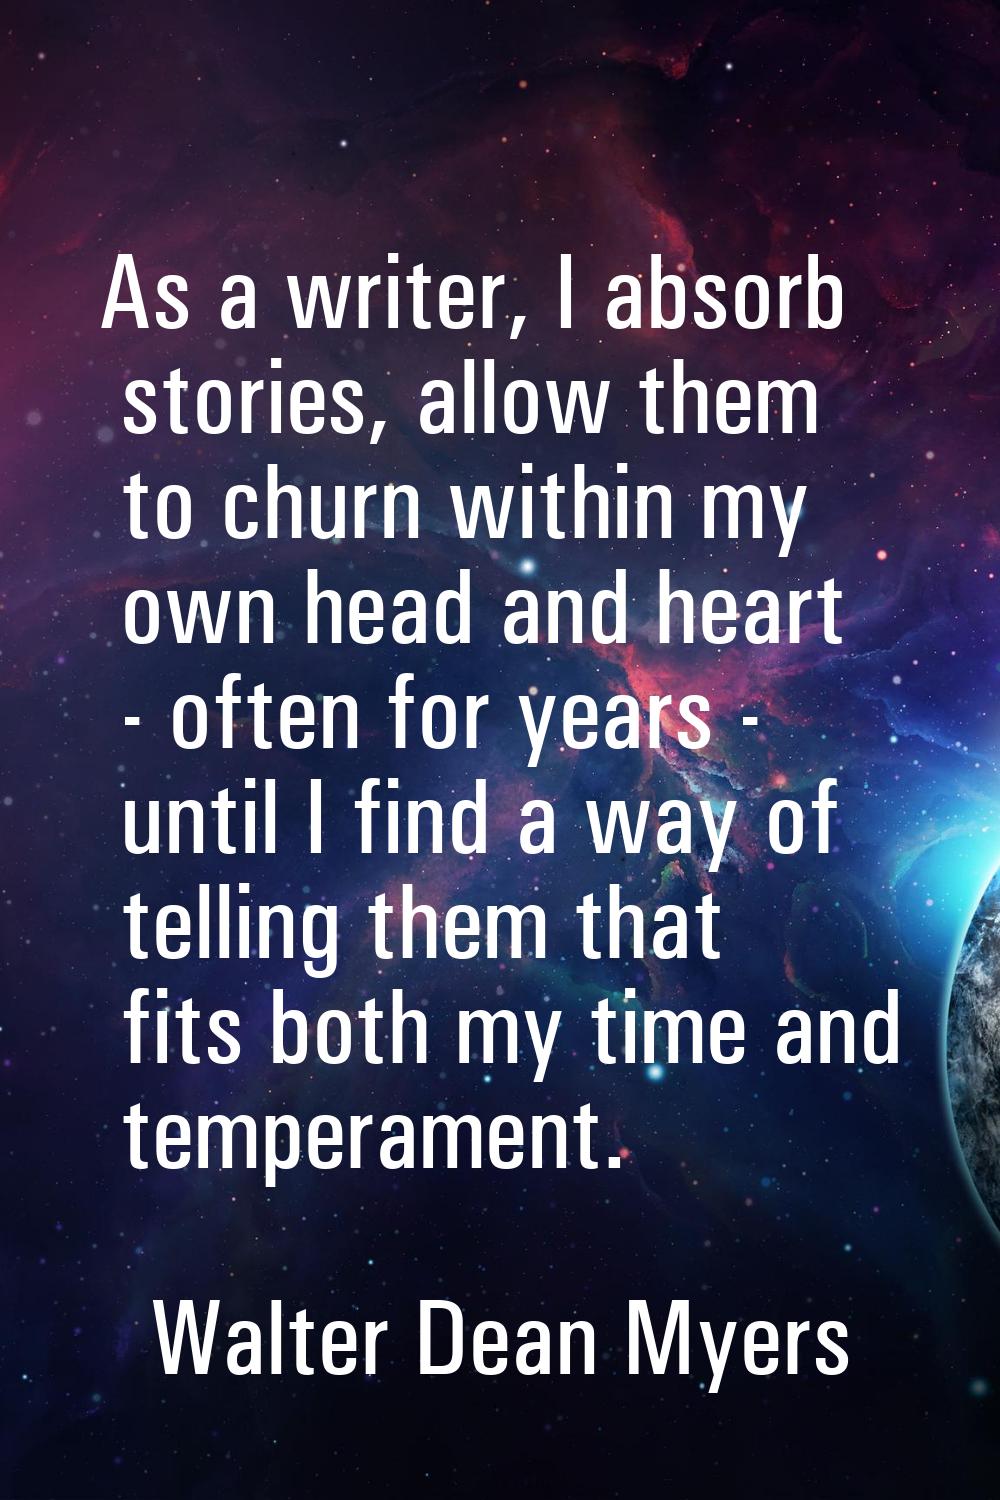 As a writer, I absorb stories, allow them to churn within my own head and heart - often for years -